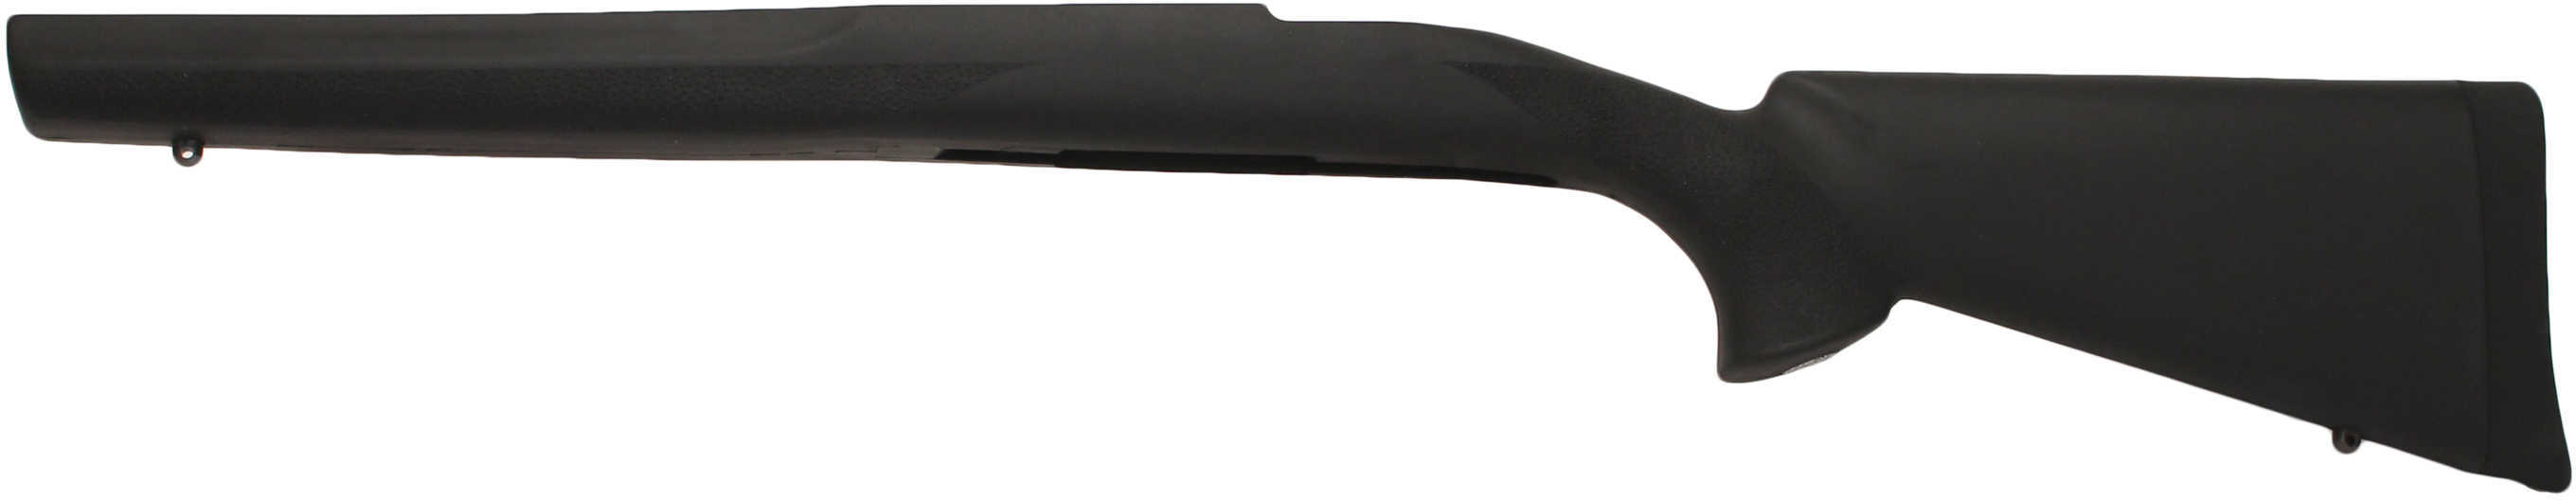 Hogue Rubber Overmolded Stock for Ruger 77 MKII SA w/ Bed Block 77002